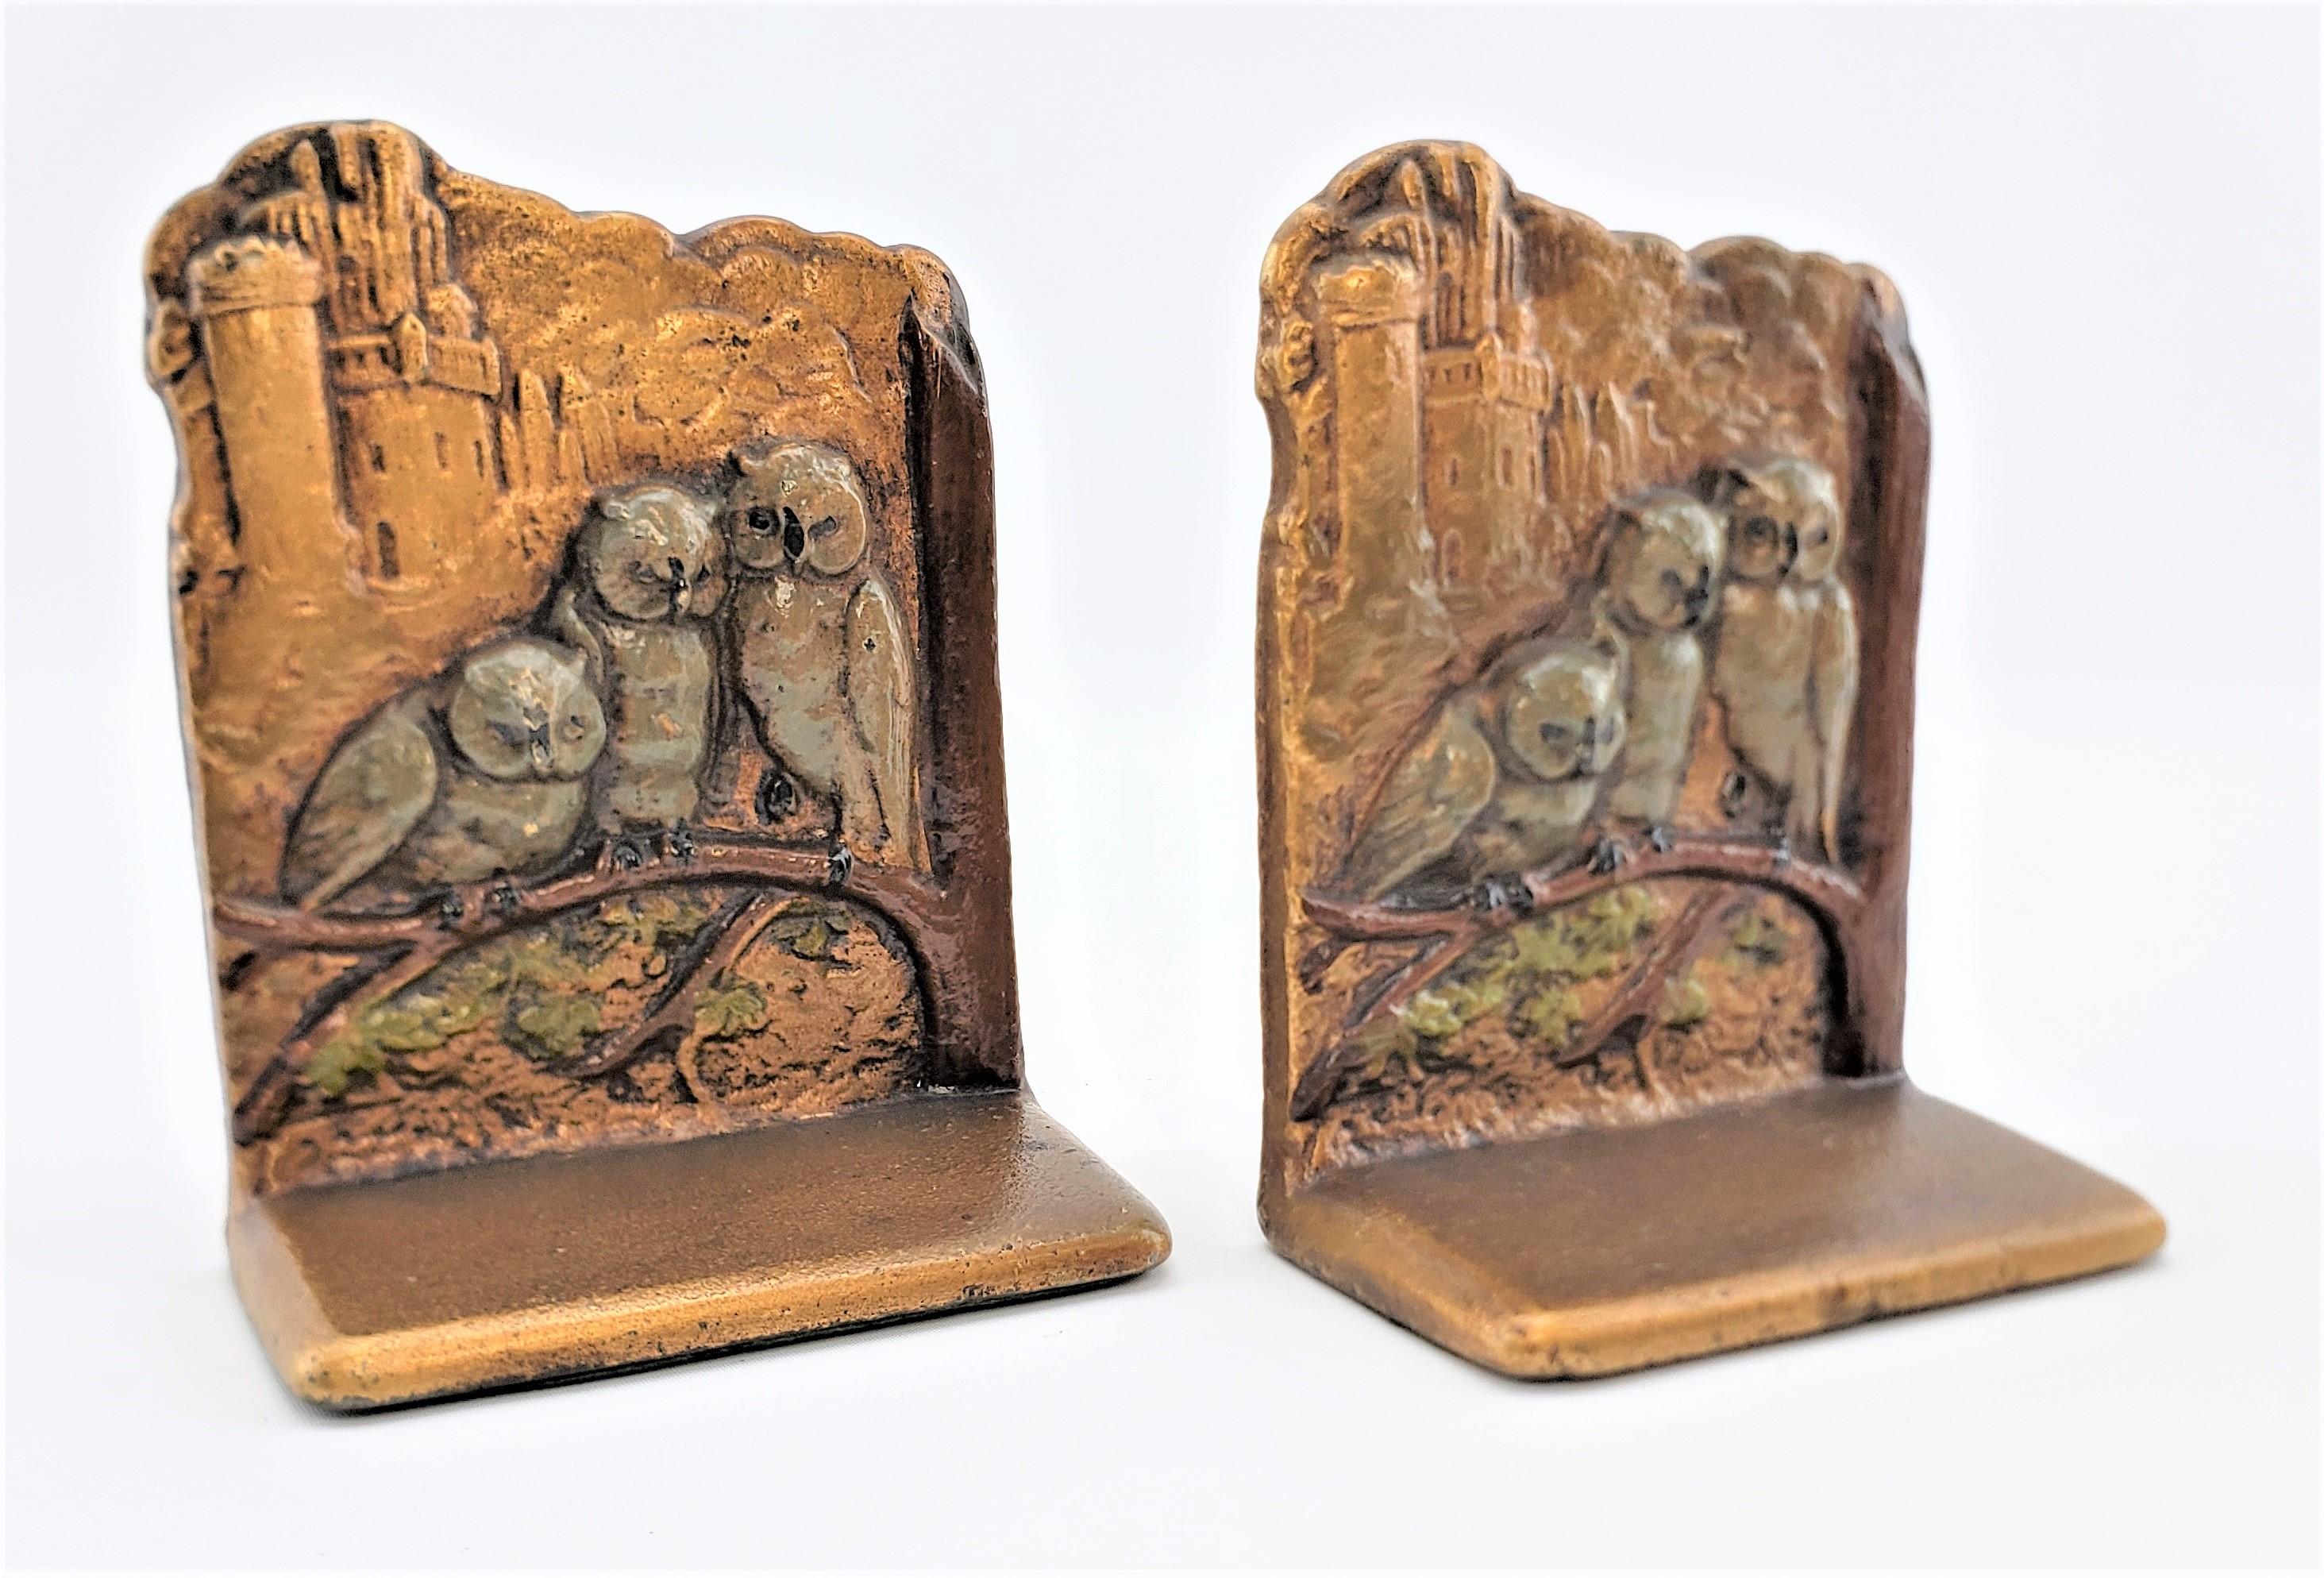 This pair of Art Deco cast brass and cold-painted bookends are signed by an unknown maker, but presumed to have been made in the United States in approximately 1925. The front faces of the bookends were cast with raised owls on branches that have